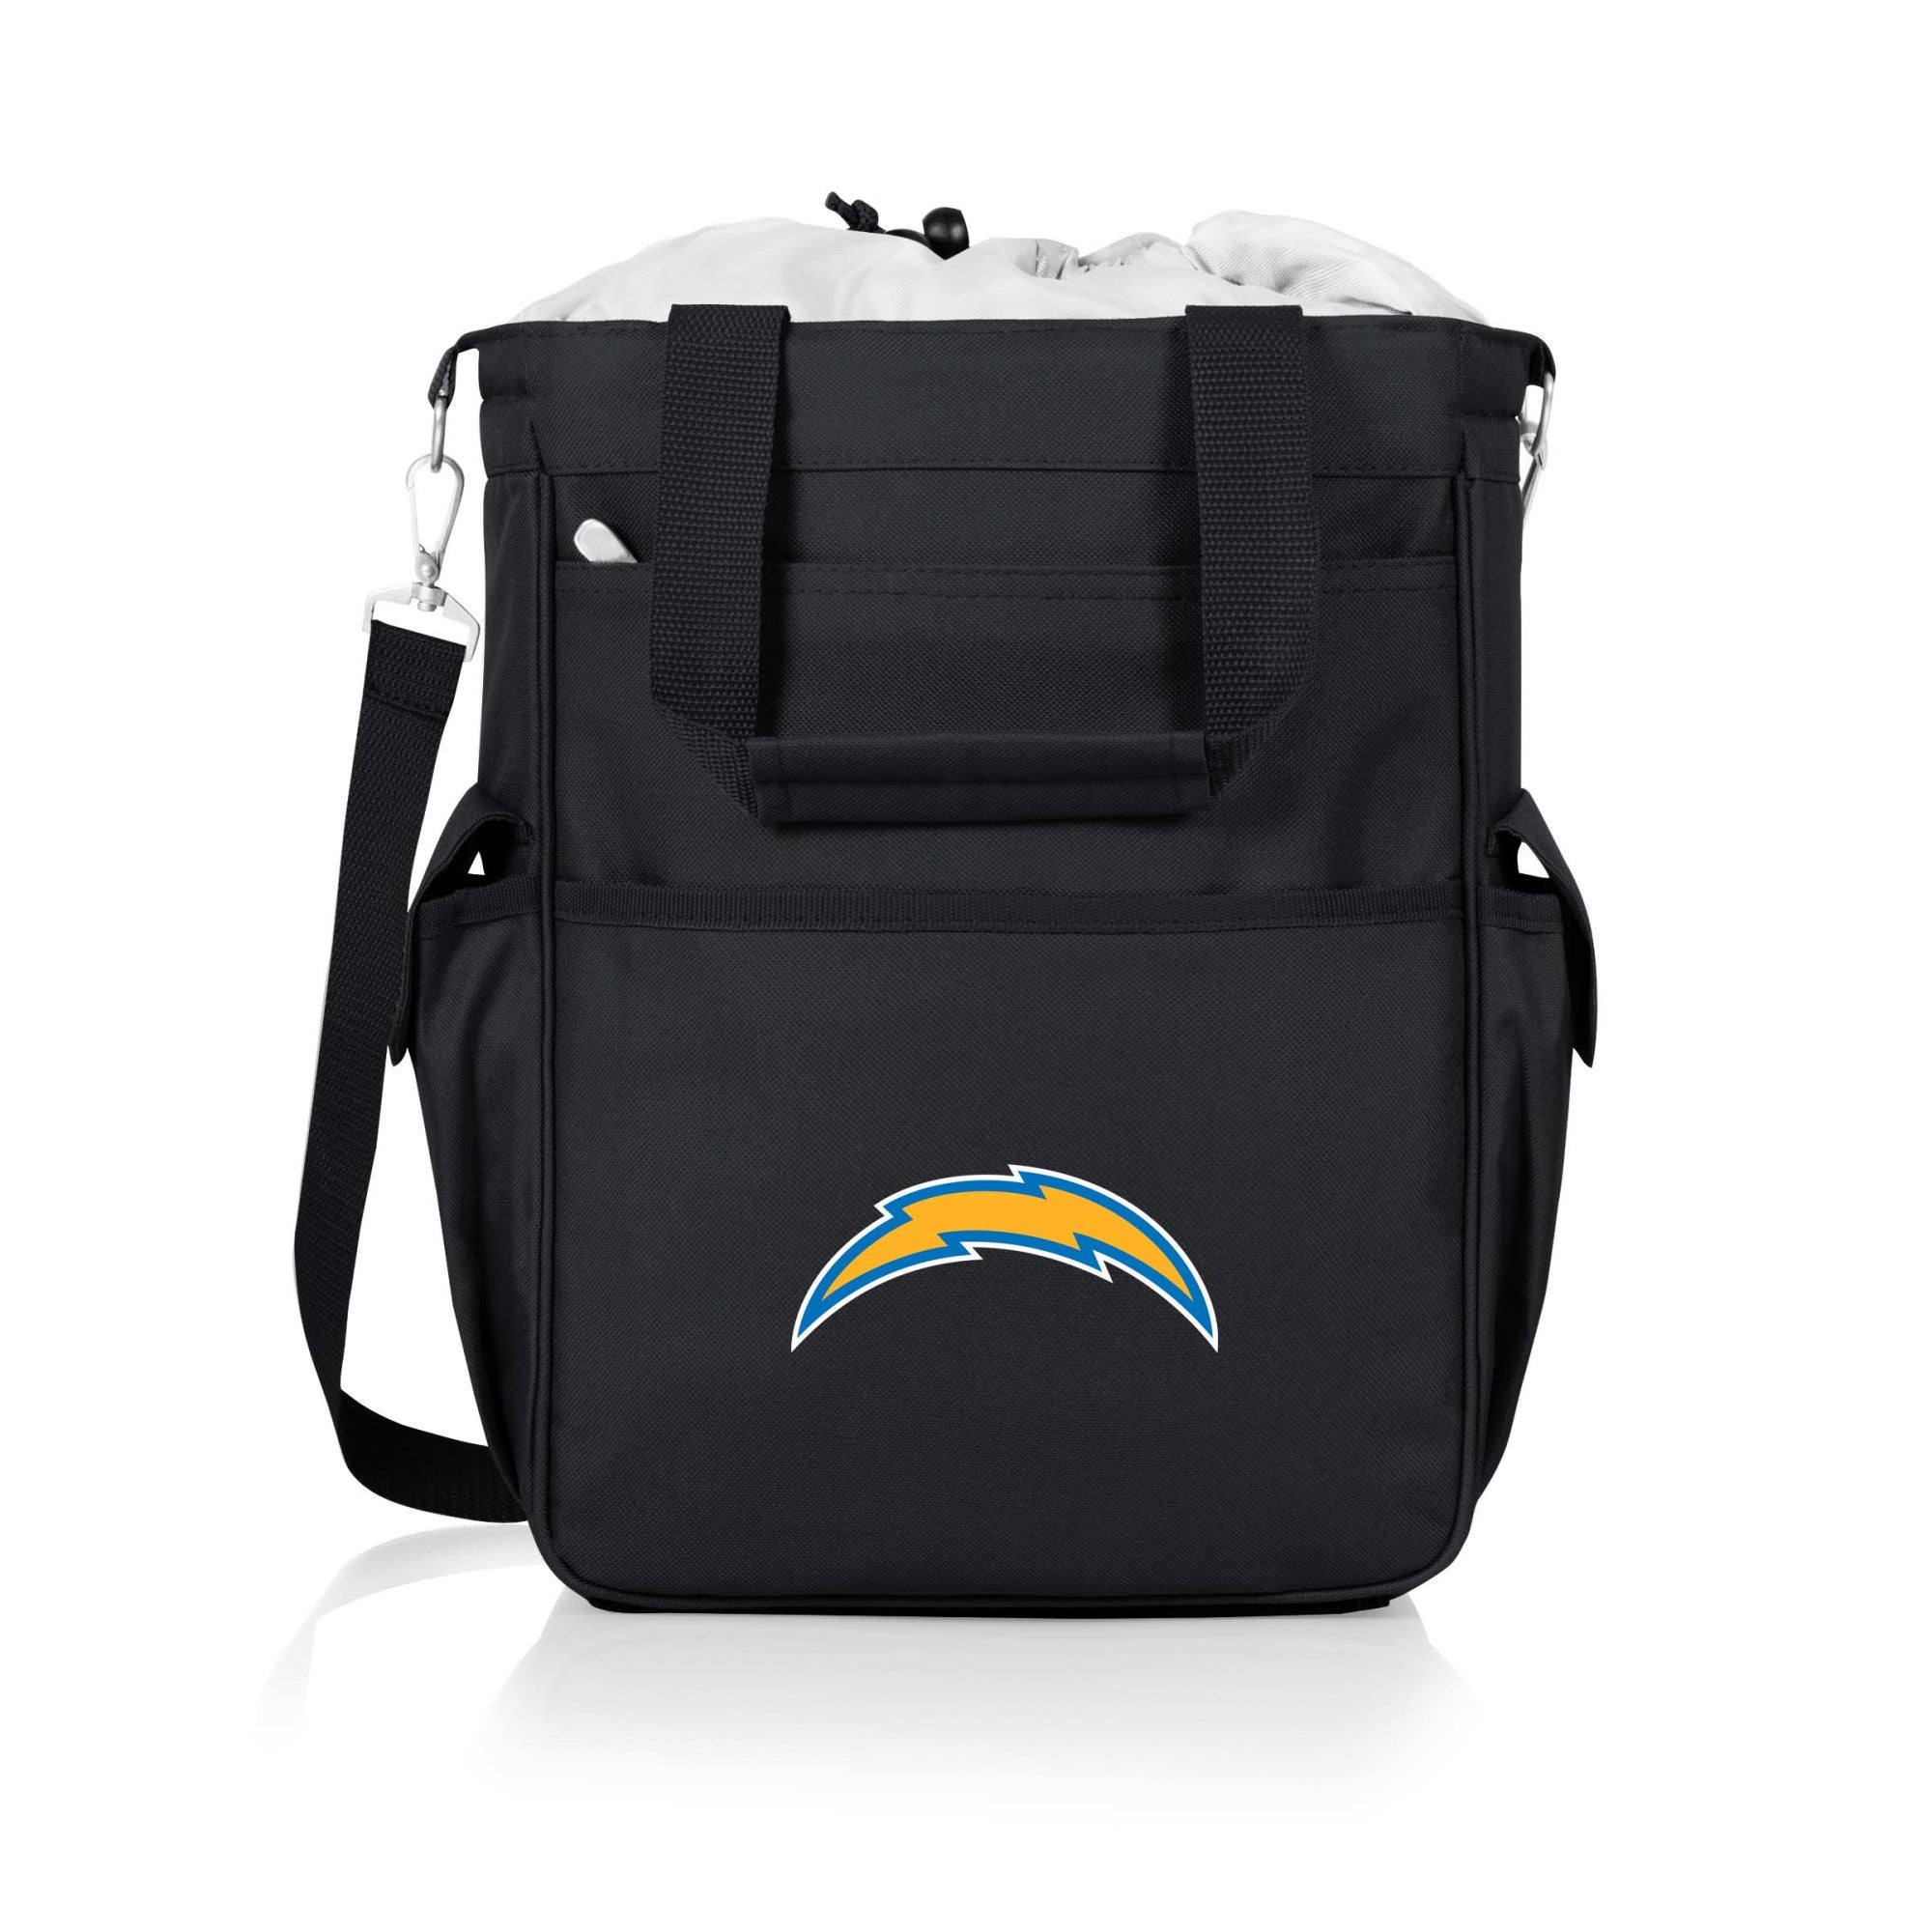 Los Angeles Chargers - Activo Cooler Tote Bag